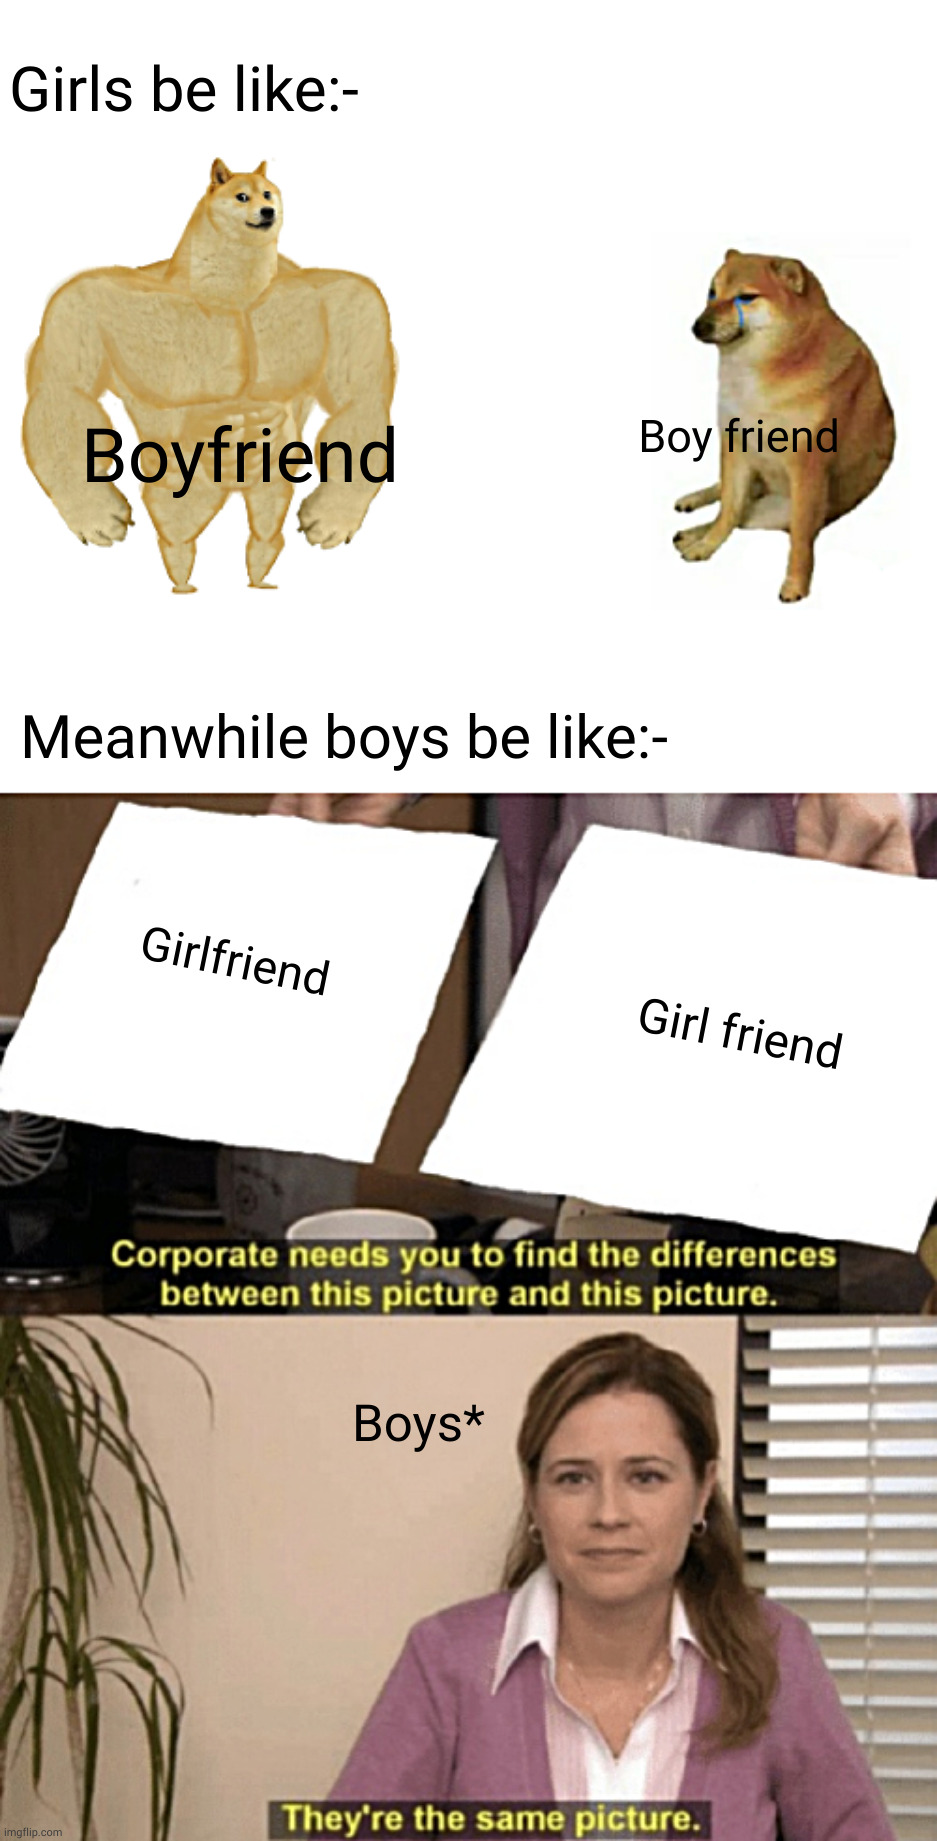 Girls Vs boys | Girls be like:-; Boy friend; Boyfriend; Meanwhile boys be like:-; Girlfriend; Girl friend; Boys* | image tagged in memes,buff doge vs cheems,corporate needs you to find the differences,girls vs boys,boys vs girls | made w/ Imgflip meme maker